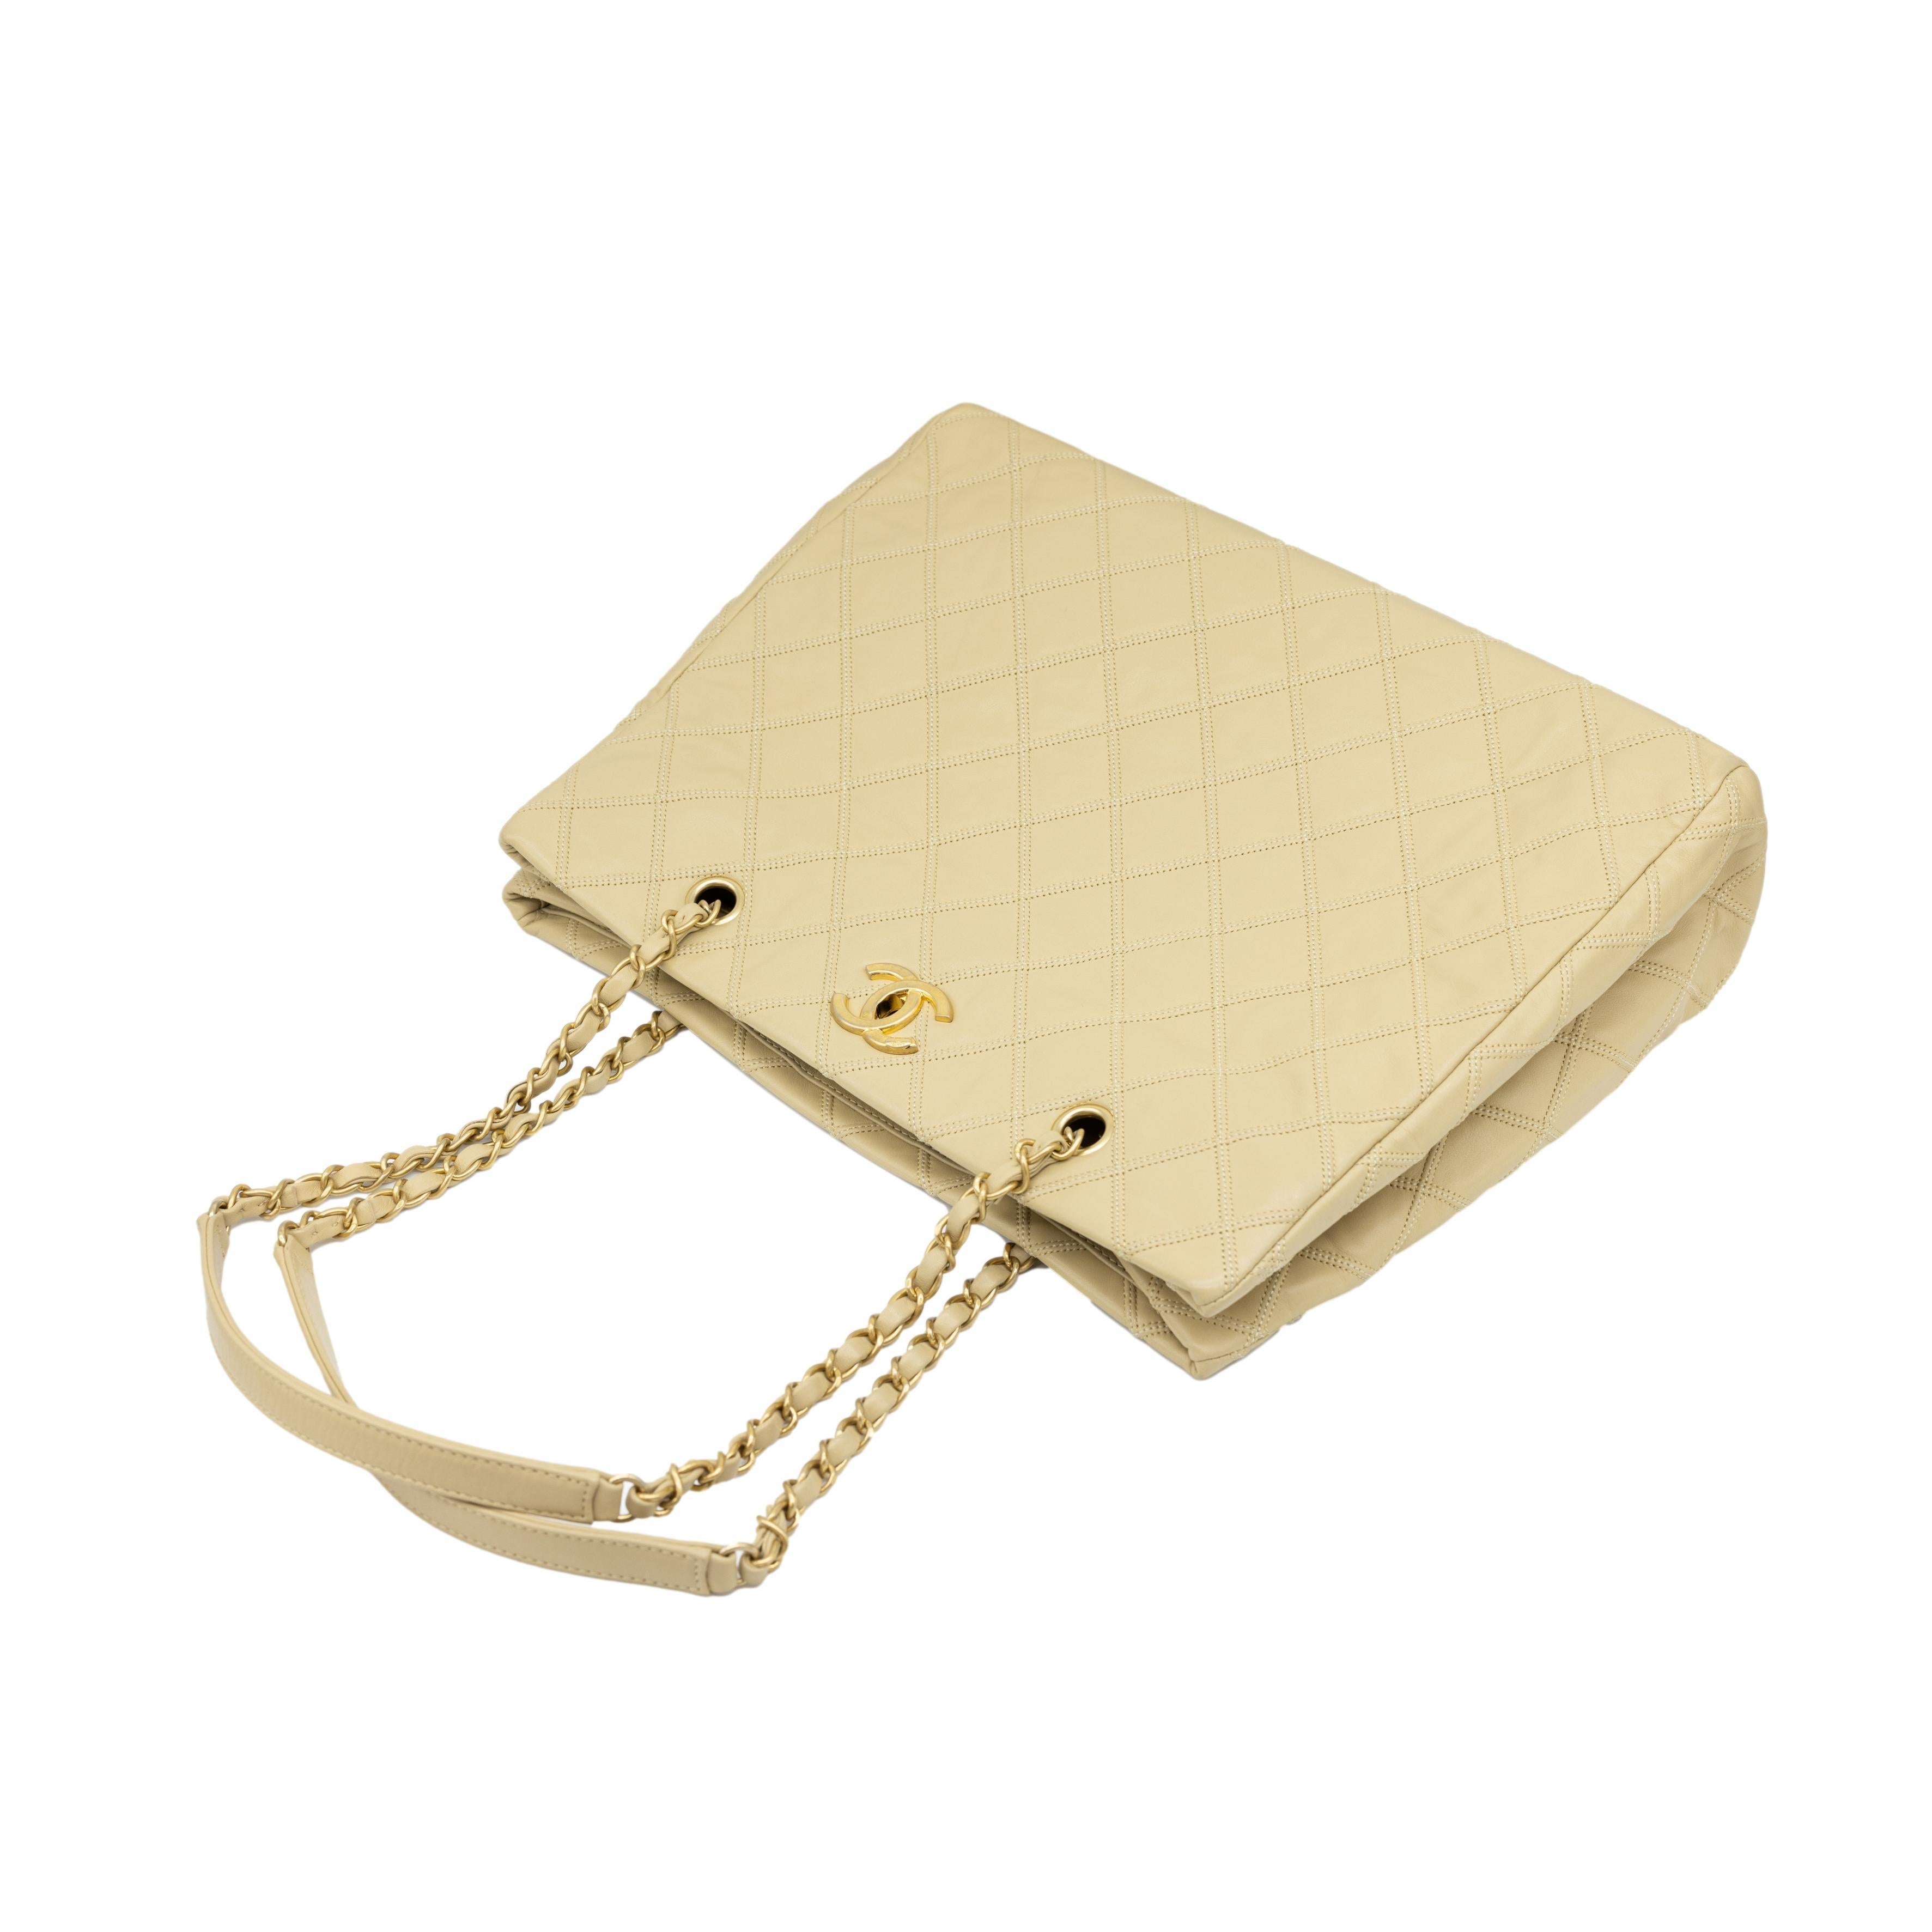 Chanel Quilted Beige Calfskin Thin City Accordion Turnlock Large Tote Bag, 2013. From the 2012-2013 Collection, this Chanel shoulder bag is crafted from premium triple stitched, diamond quilted calfskin and Chanel's most luxurious lambskin leather